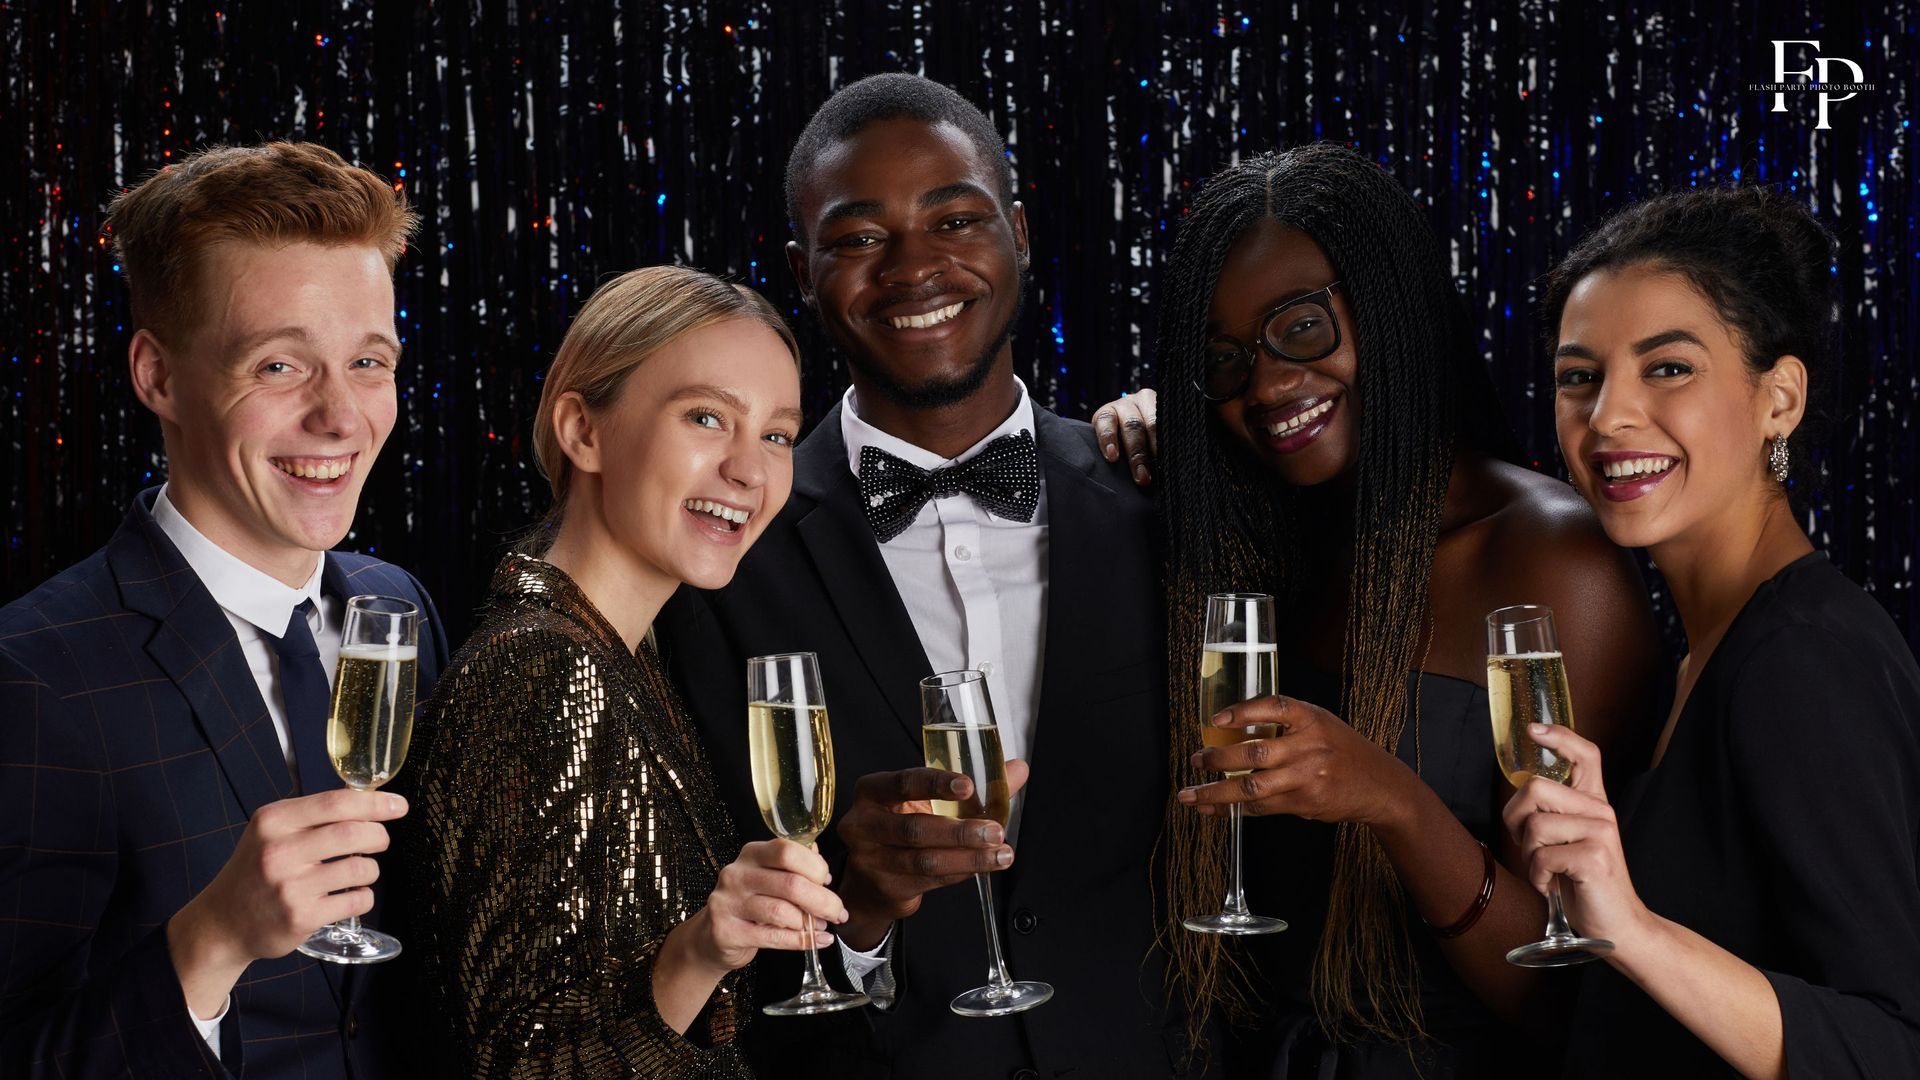 In Charlotte, friends strike poses and enjoy prom with Flash Party's photo booth.